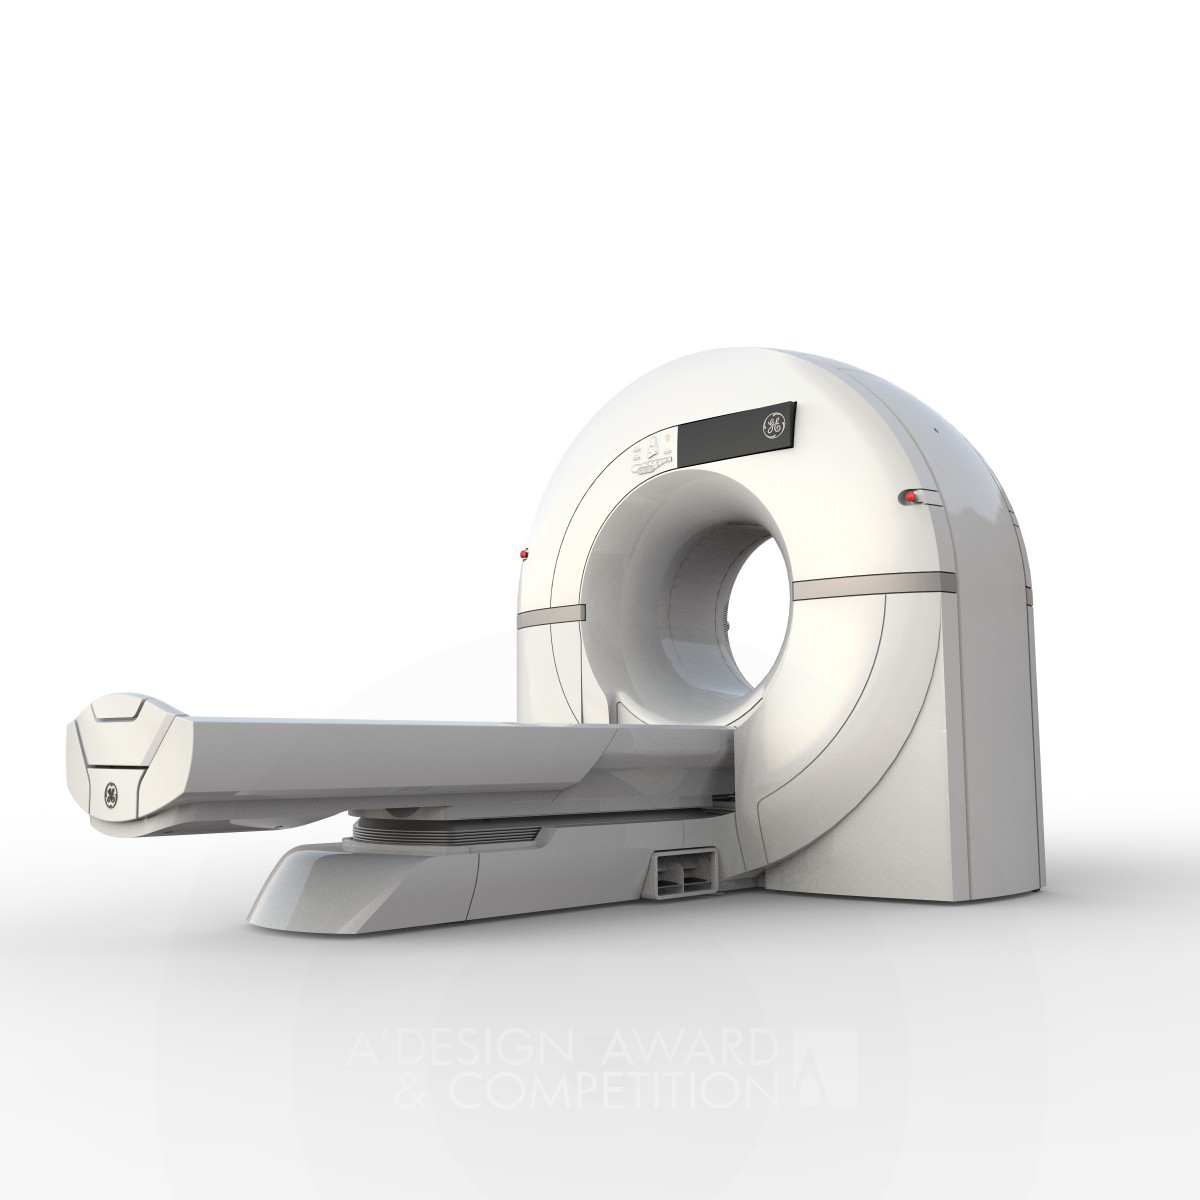 CardioGraphe Ct Scanner